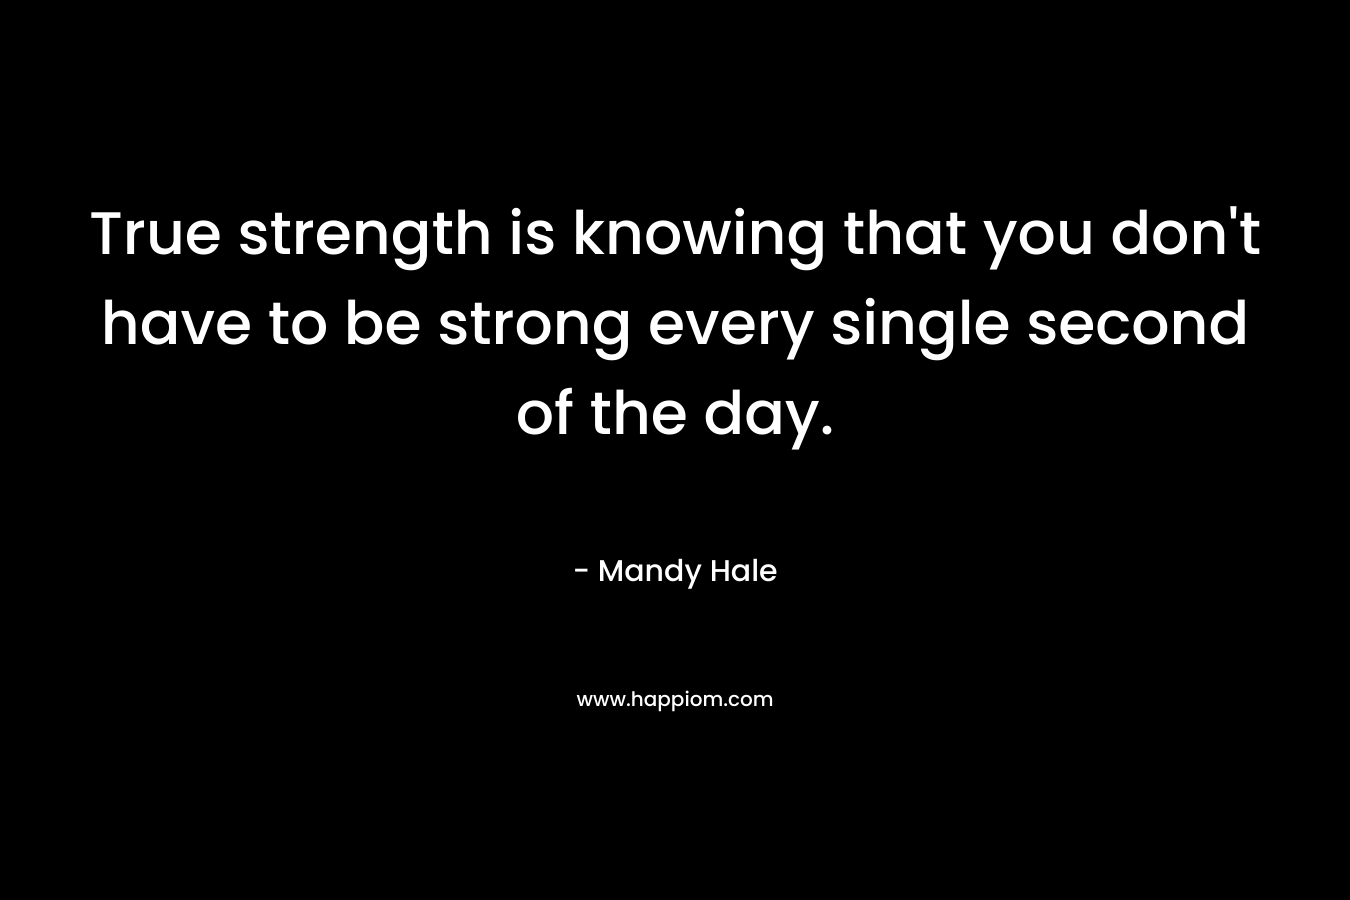 True strength is knowing that you don't have to be strong every single second of the day.